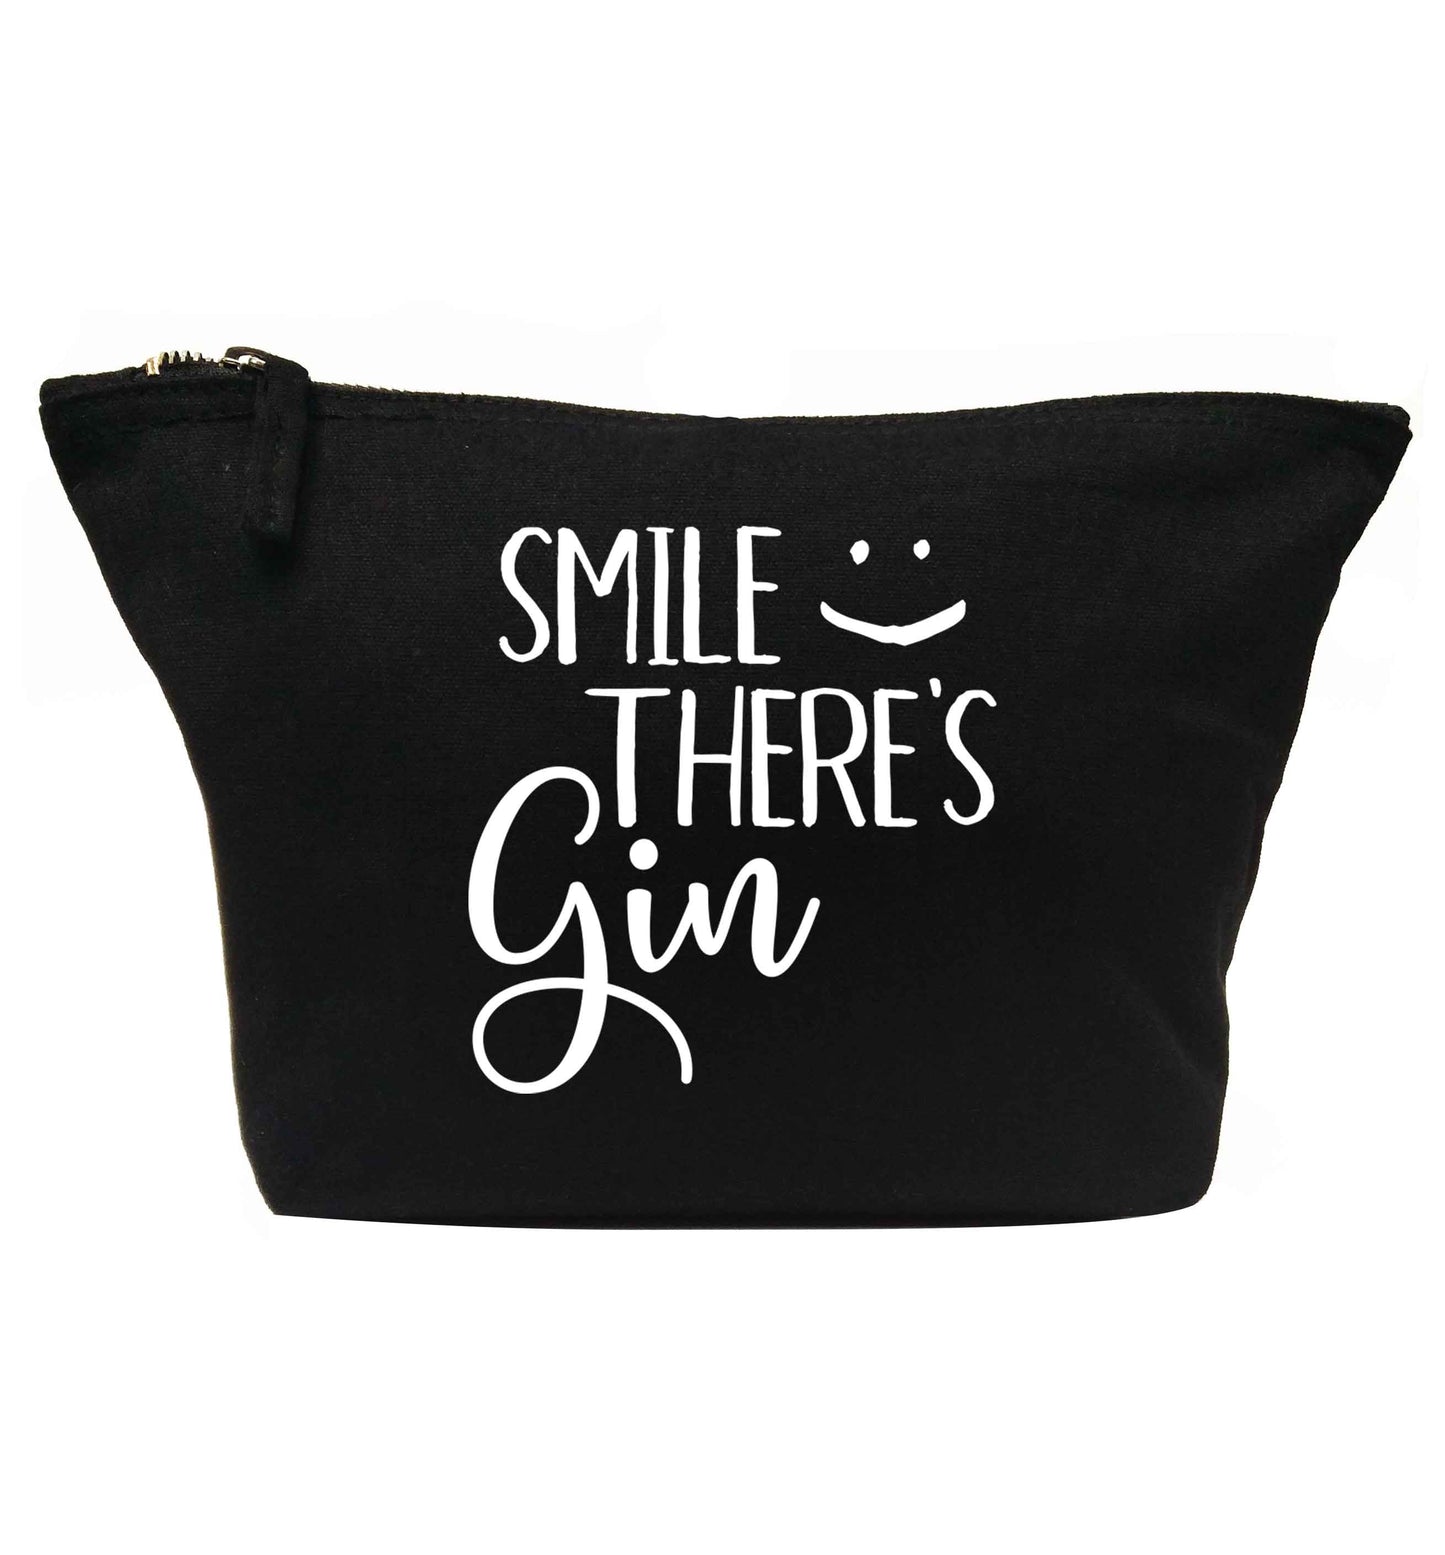 Smile there's gin | makeup / wash bag